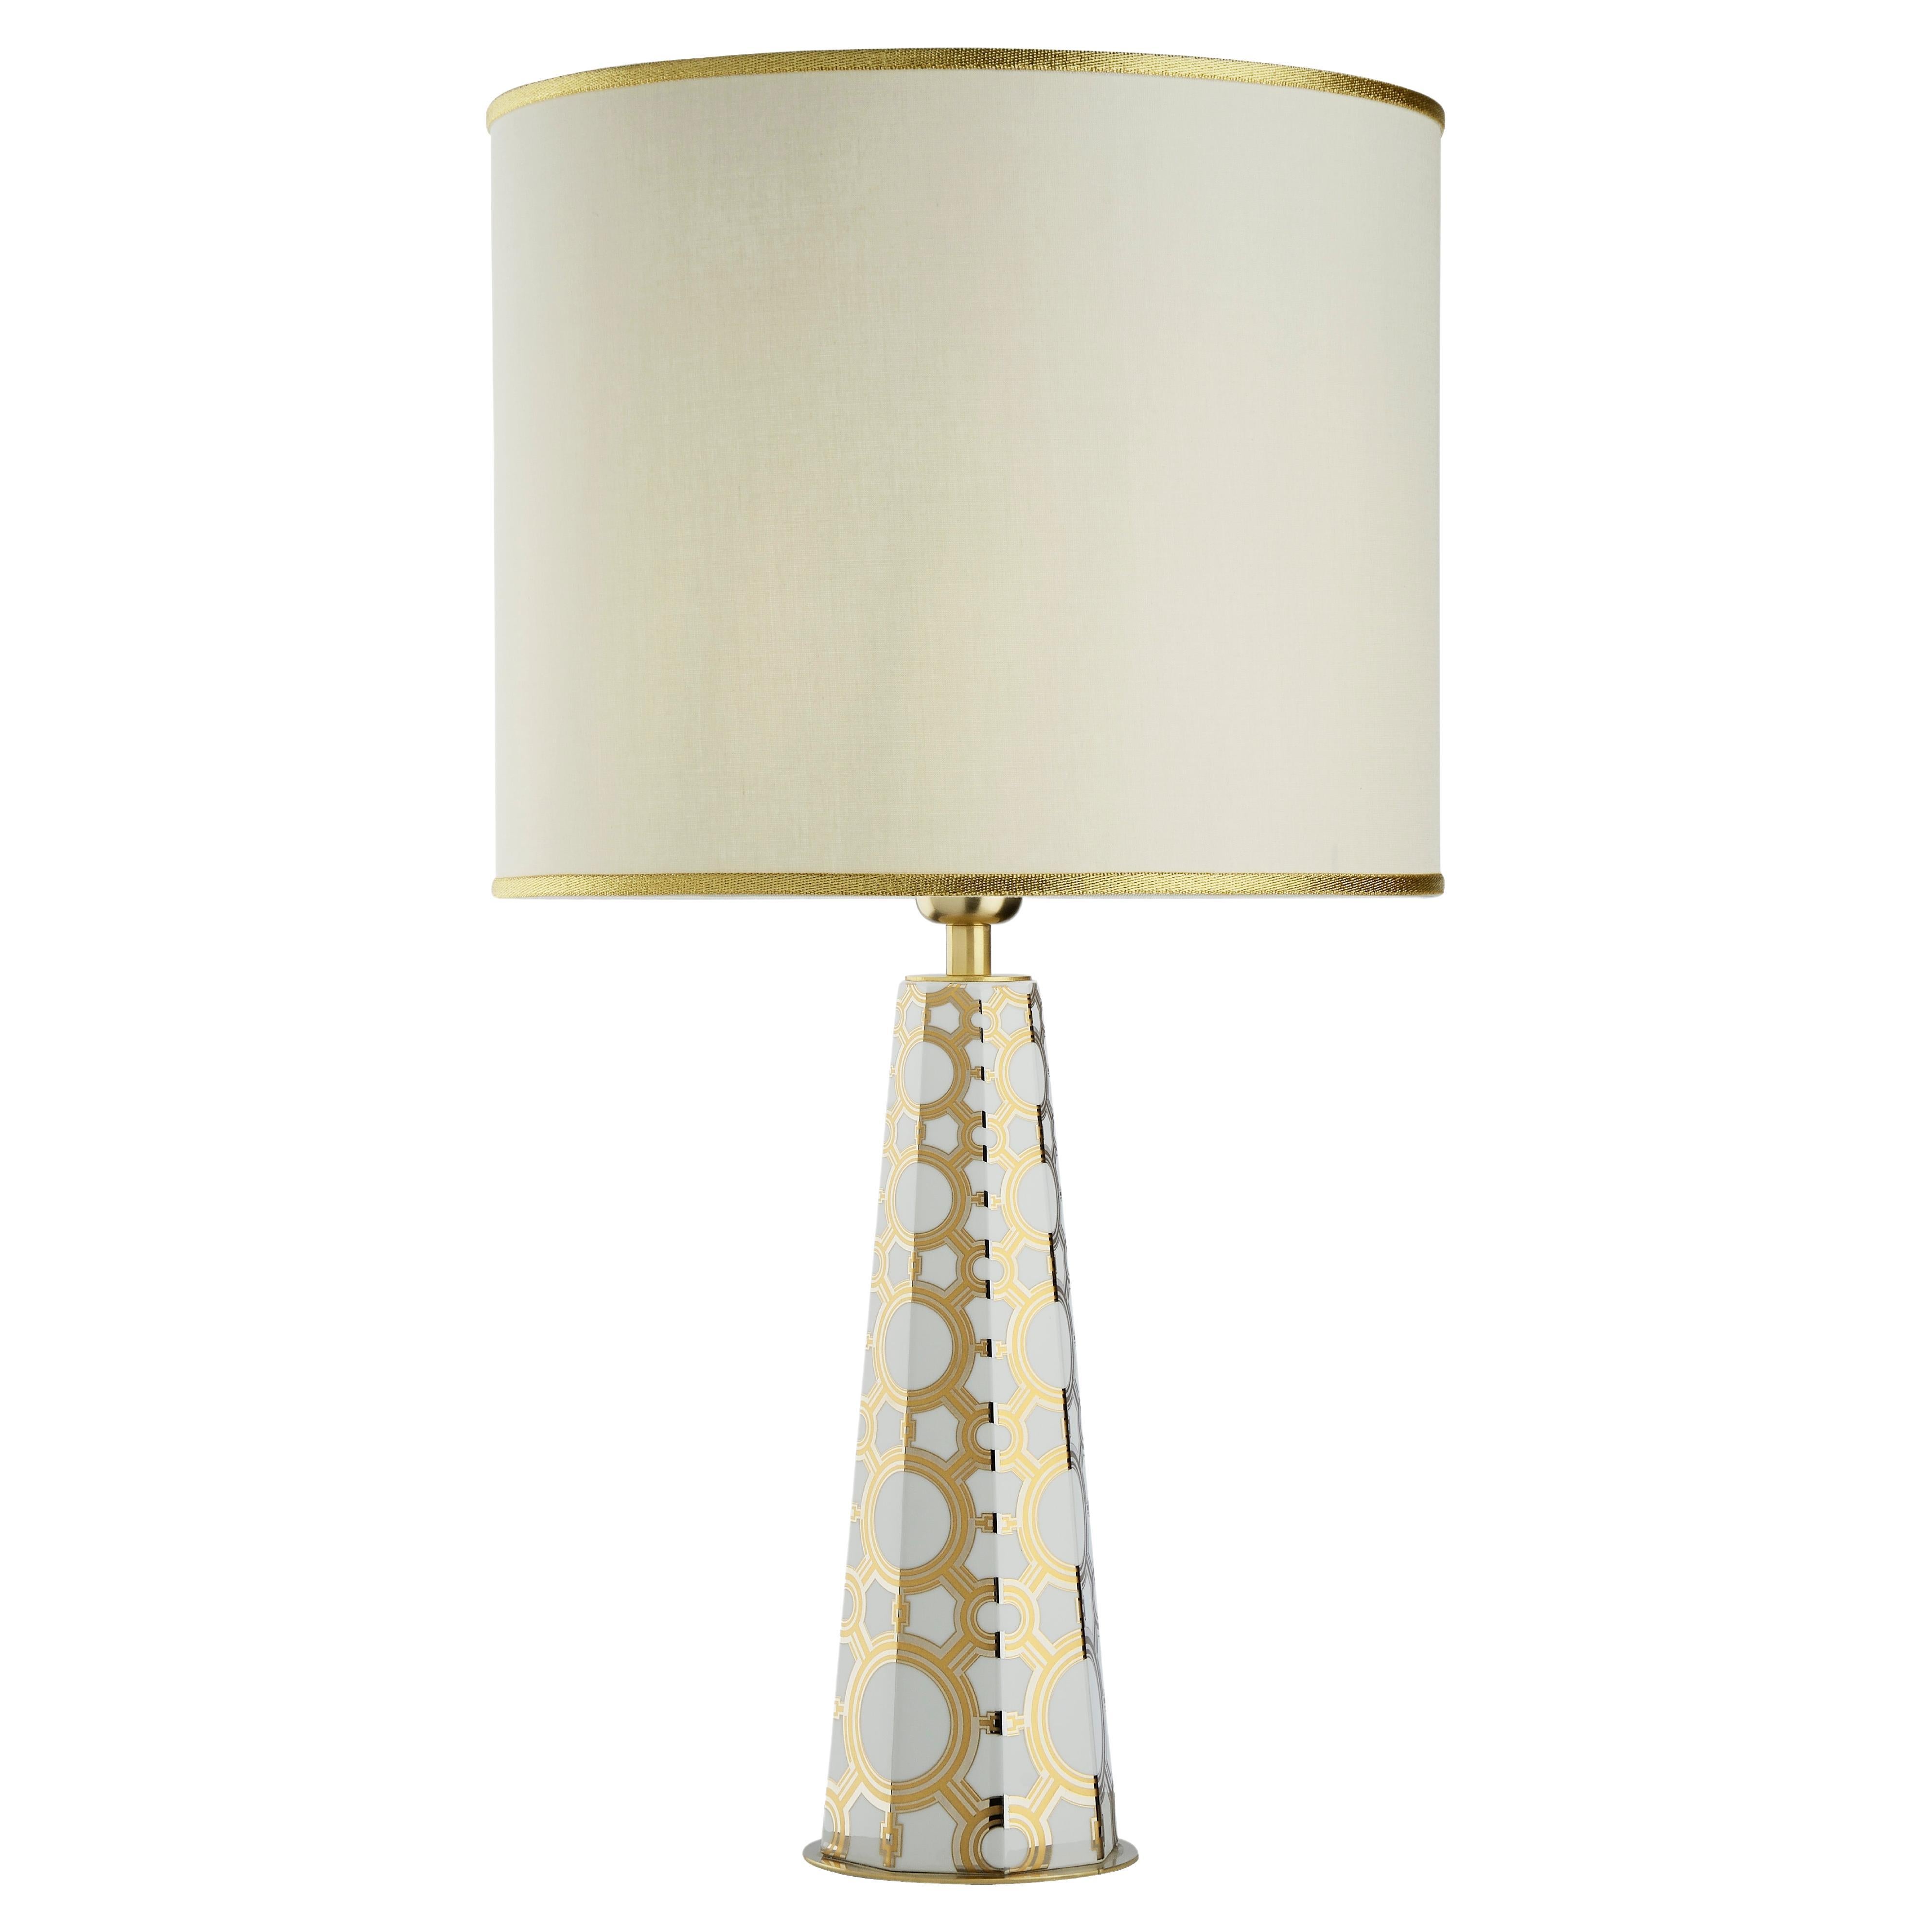 Palazzo Vecchio Collection, Table Lamp with Gold and Platinum Decorations